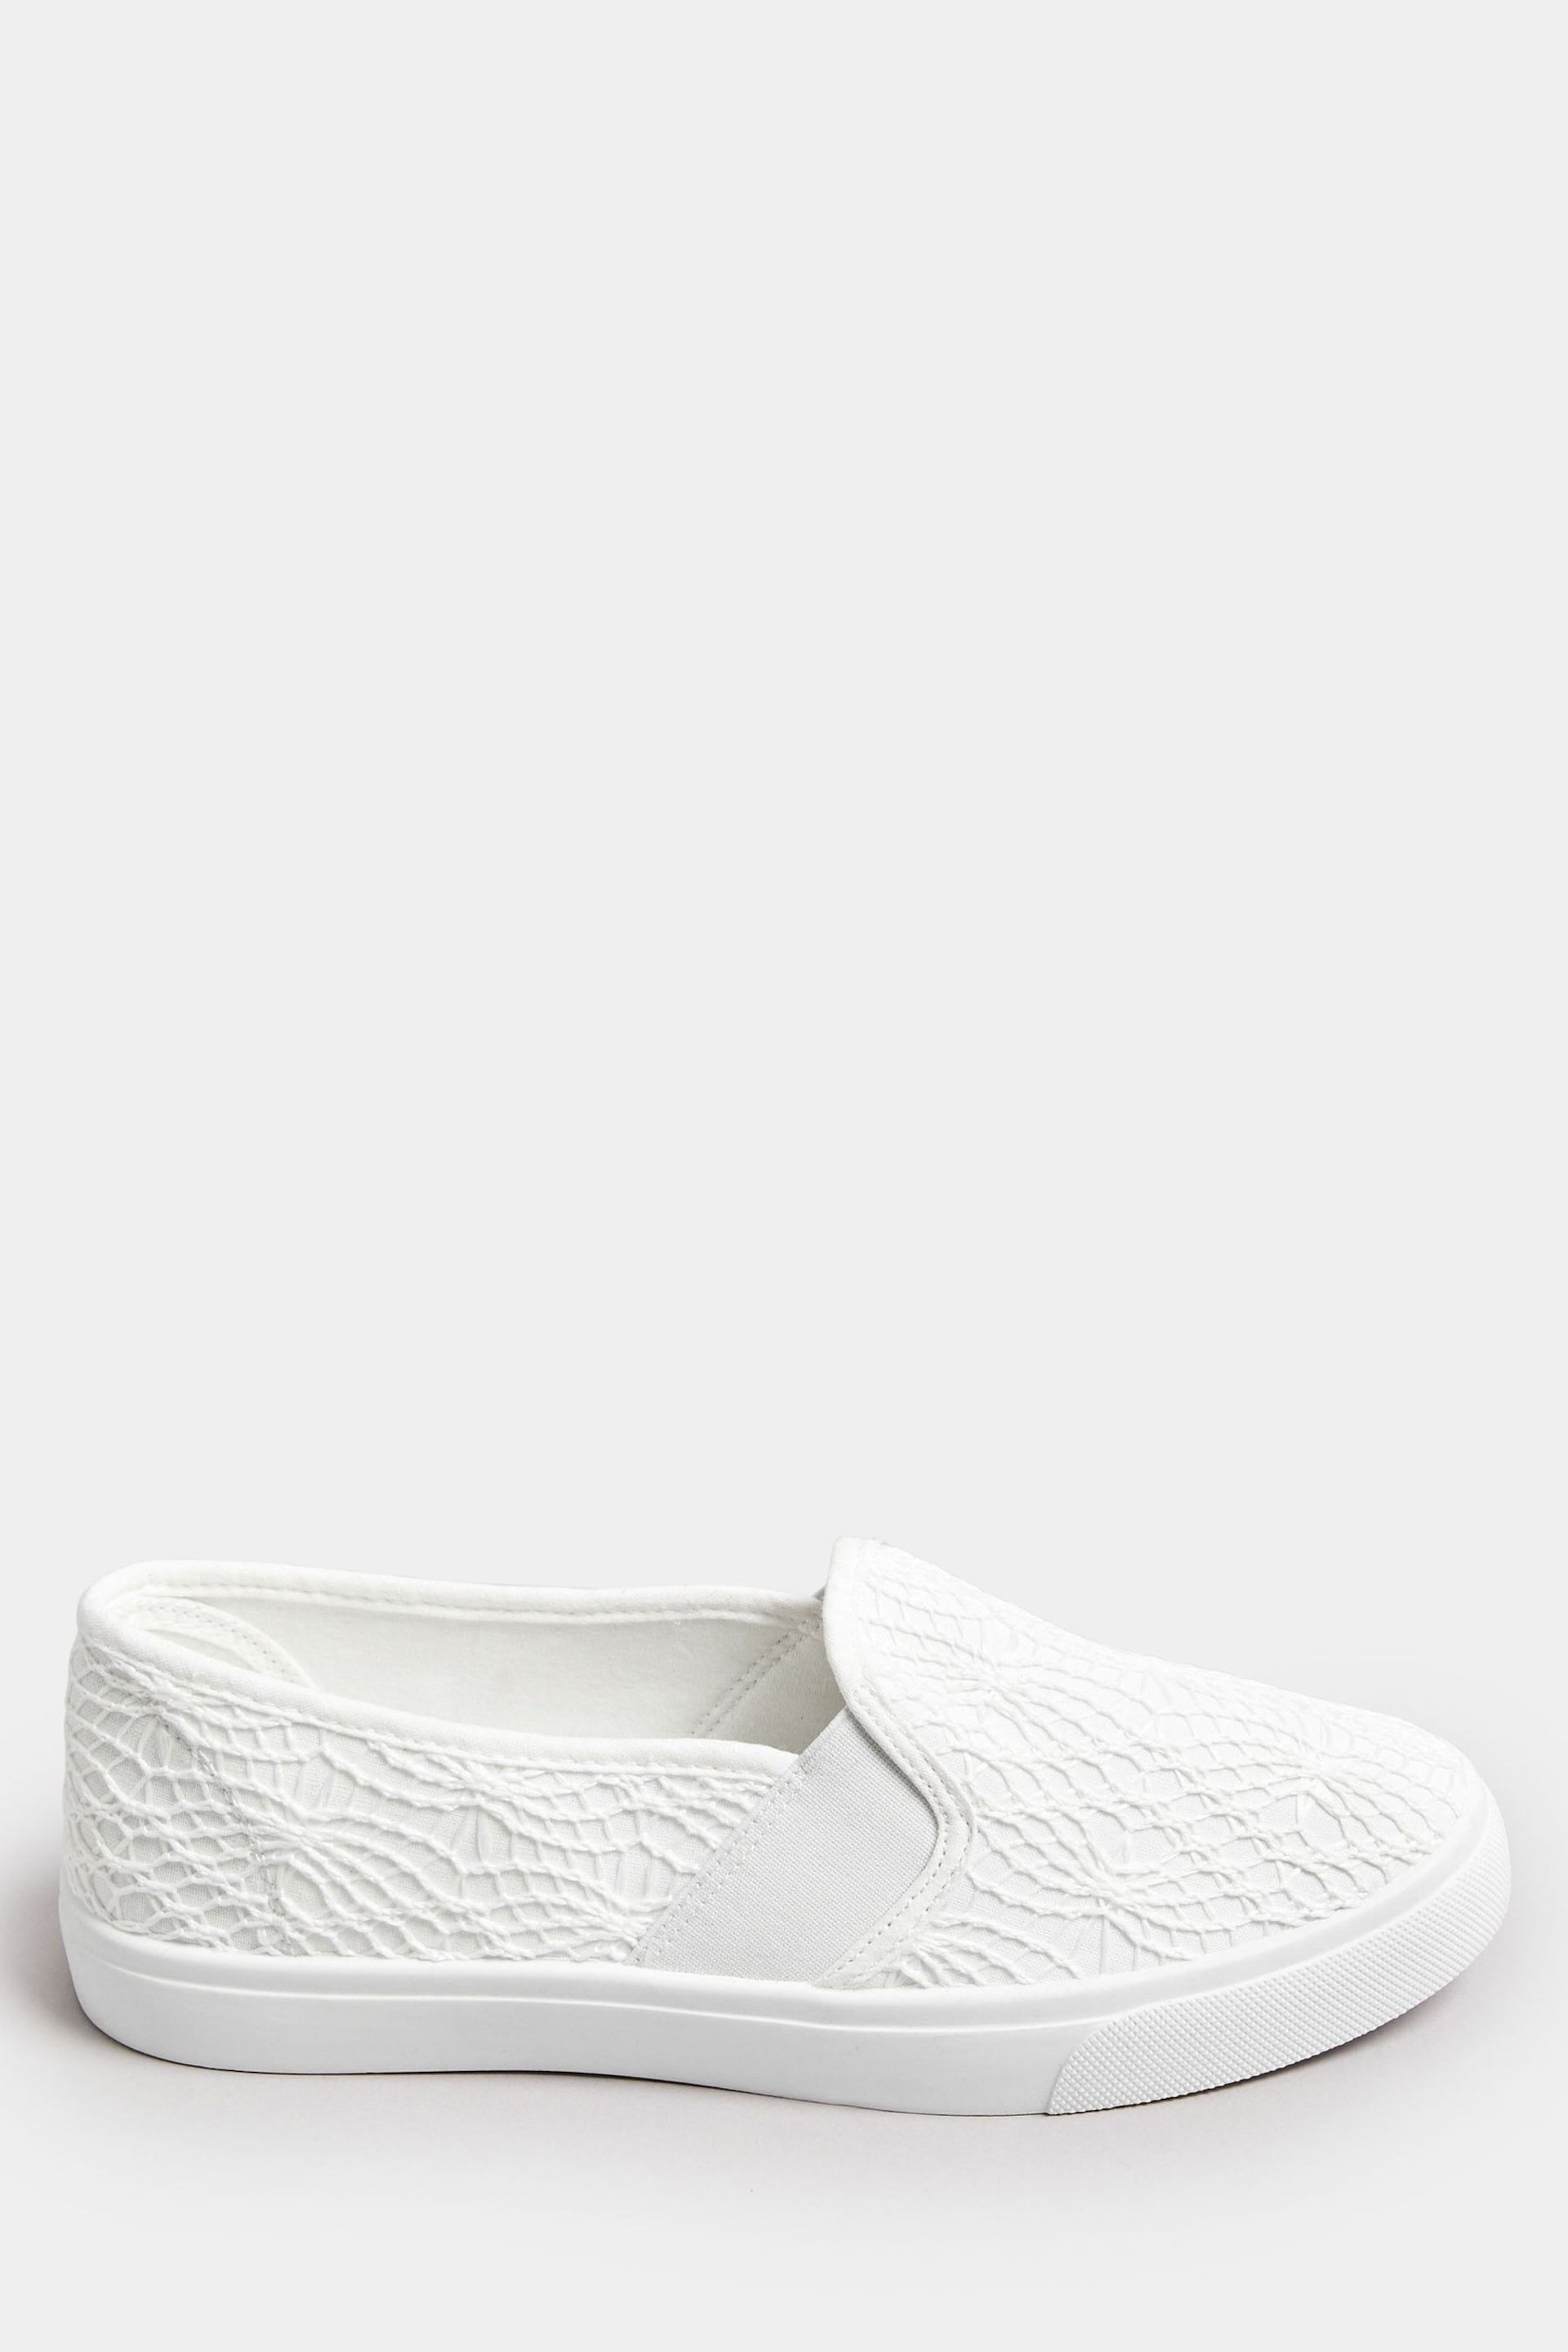 Yours Curve White Broderie Anglaise Slip-On Trainers In Wide E Fit - Image 1 of 5